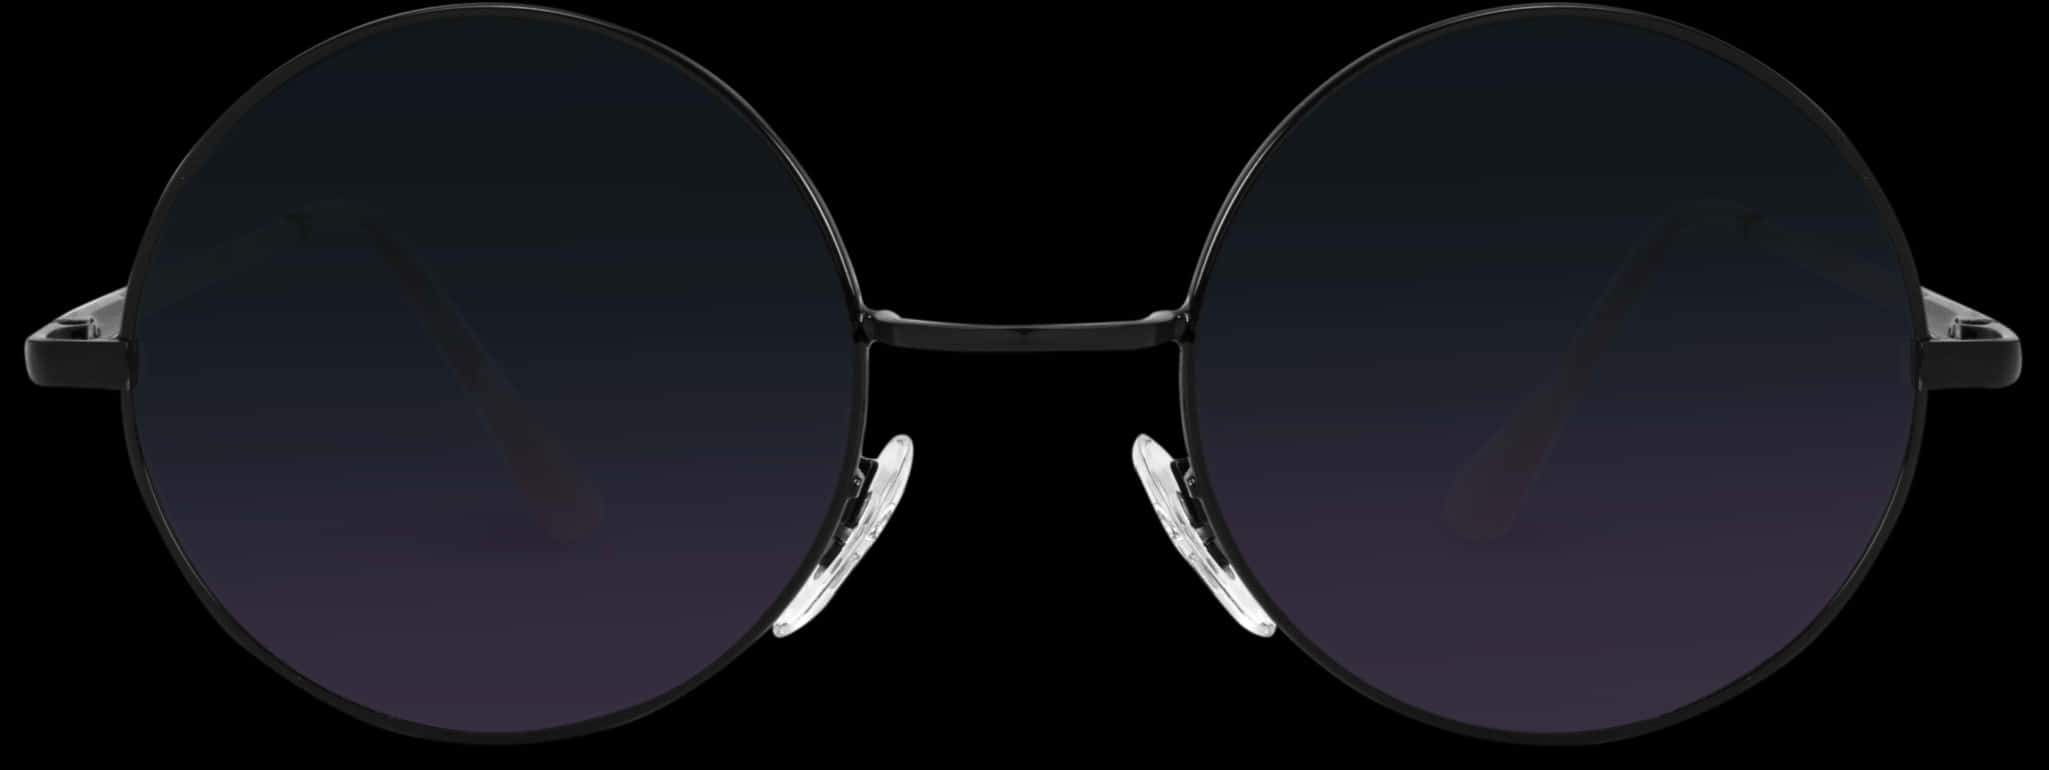 Round Black Sunglasses Isolated PNG